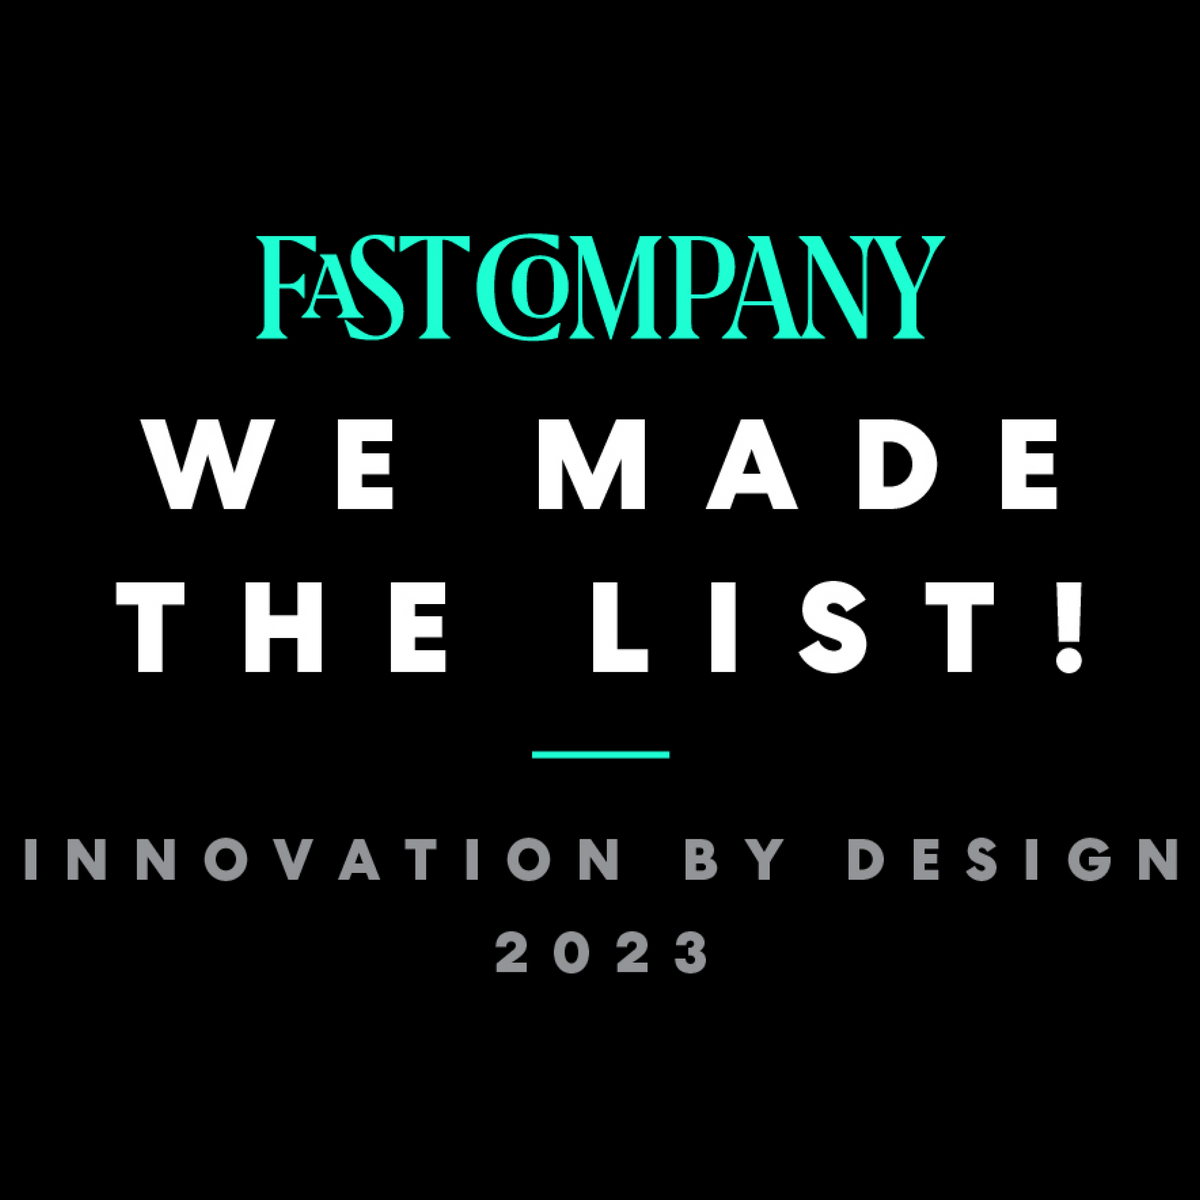 Fast Company’s 2023 Innovation by Design Awards